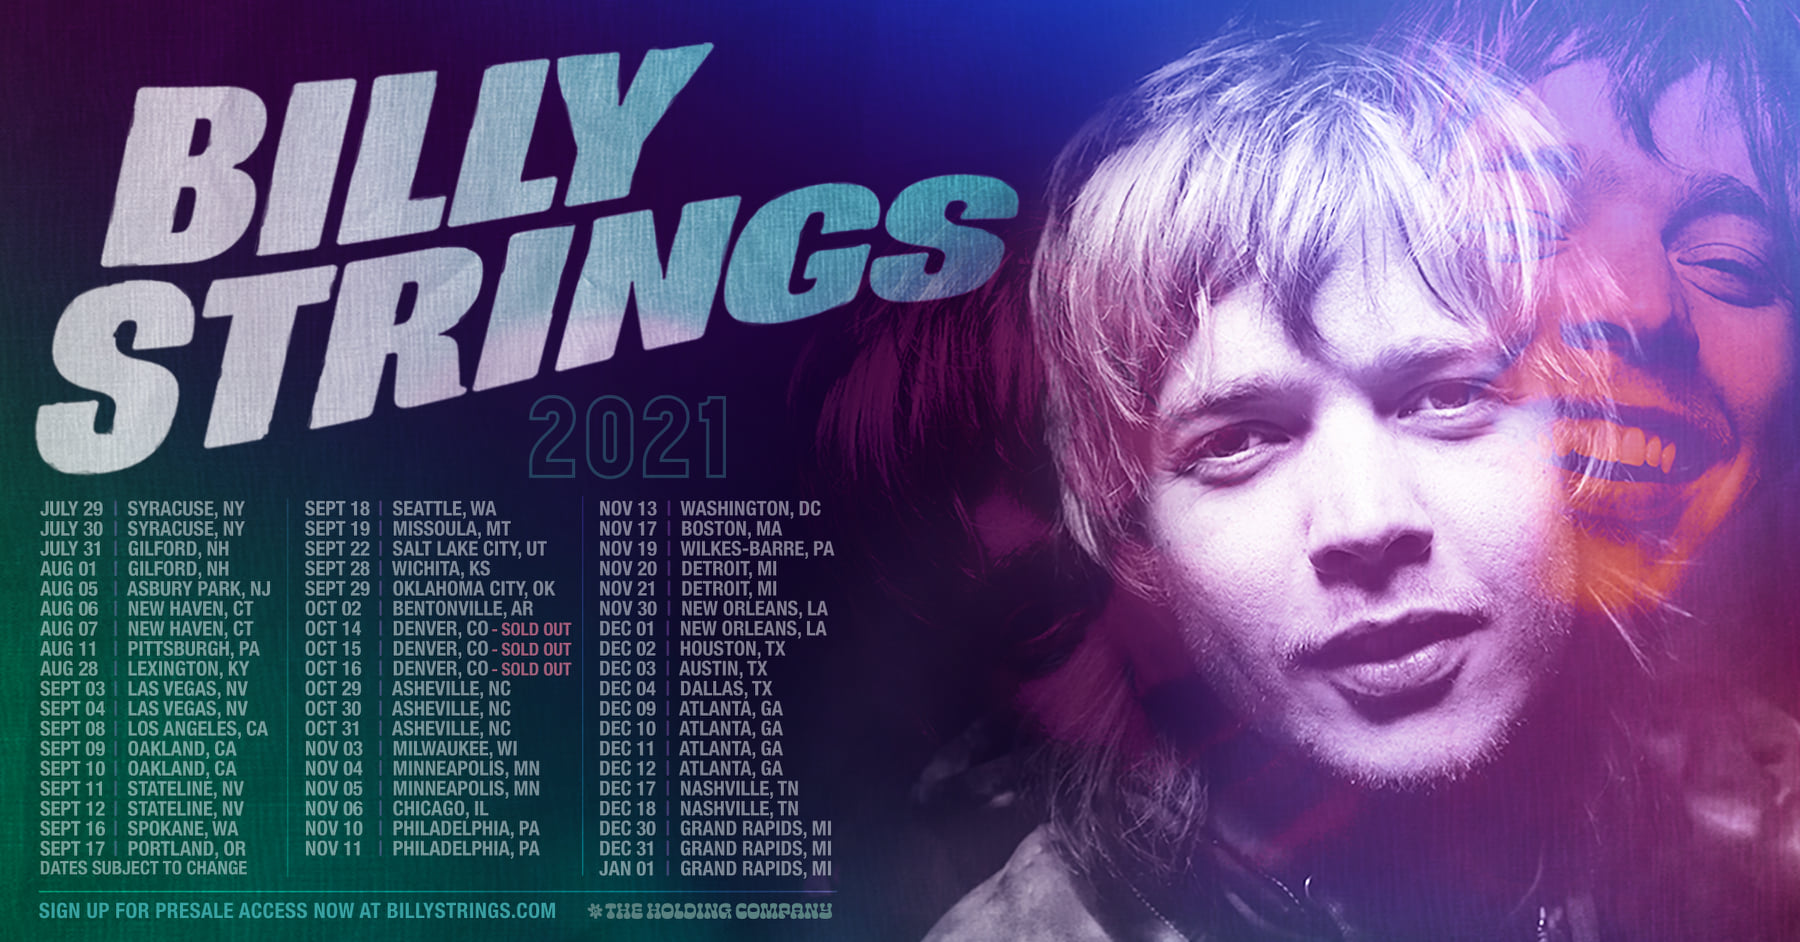 Billy Strings Sets 2021 Tour Dates